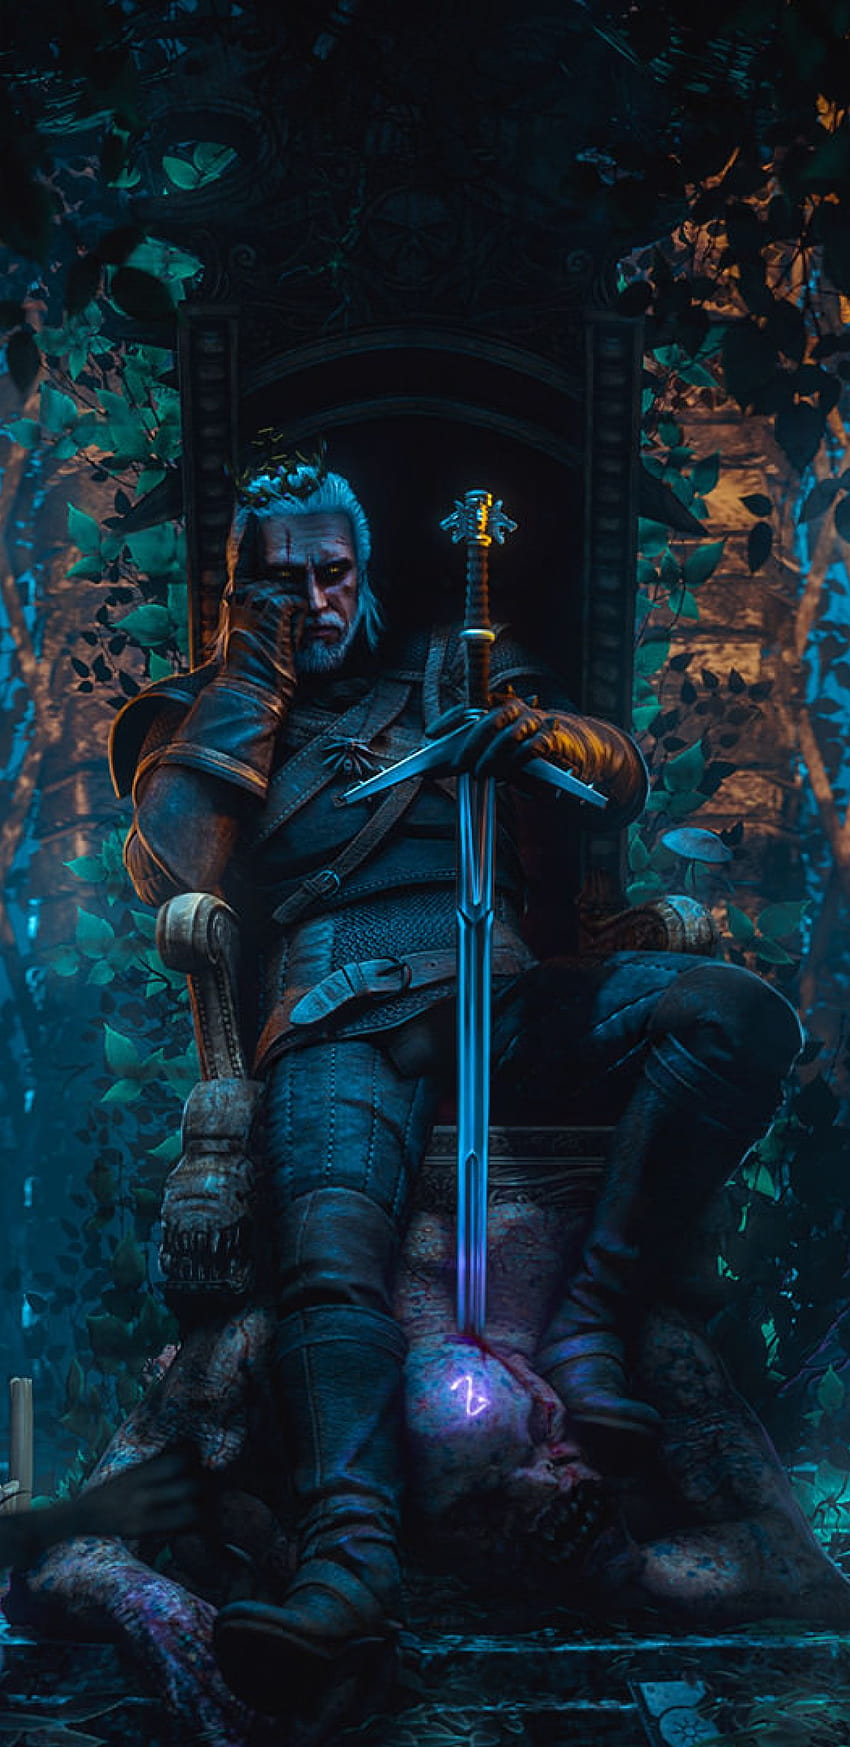 1440x2960 ​​Geralt Of Rivia The Witcher 3 Samsung Galaxy Note 9,8, S9,S8,S Q , Игри и фонове, the witcher android HD тапет за телефон